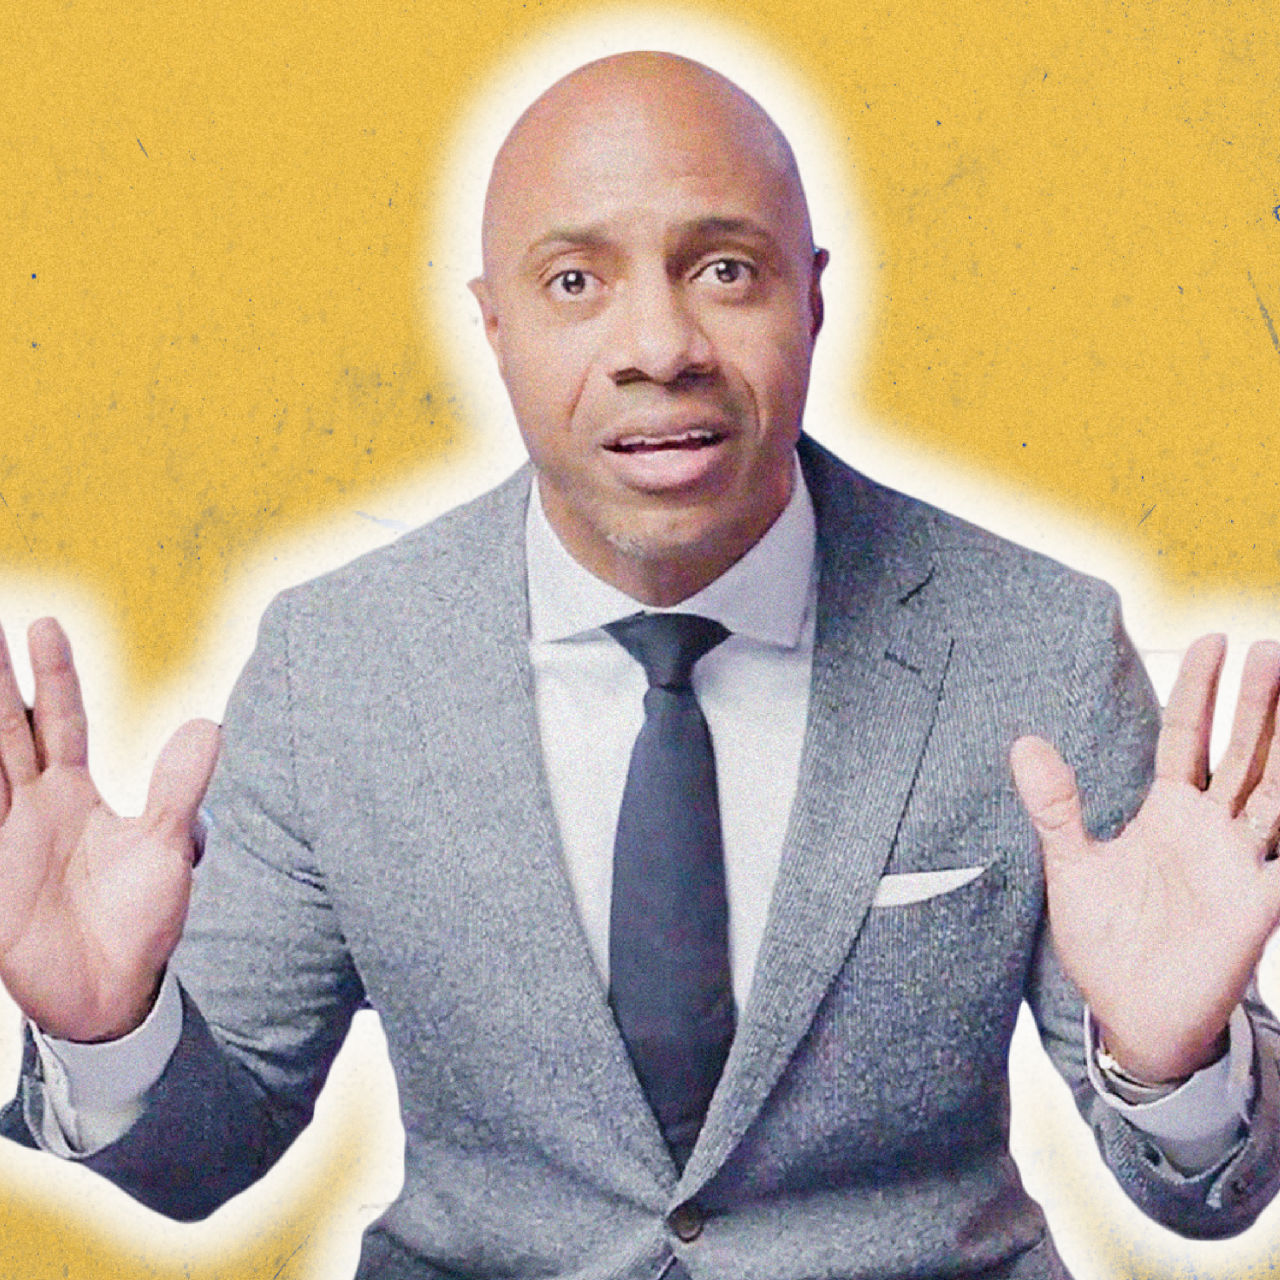 How To Speak With Power with Jay Williams